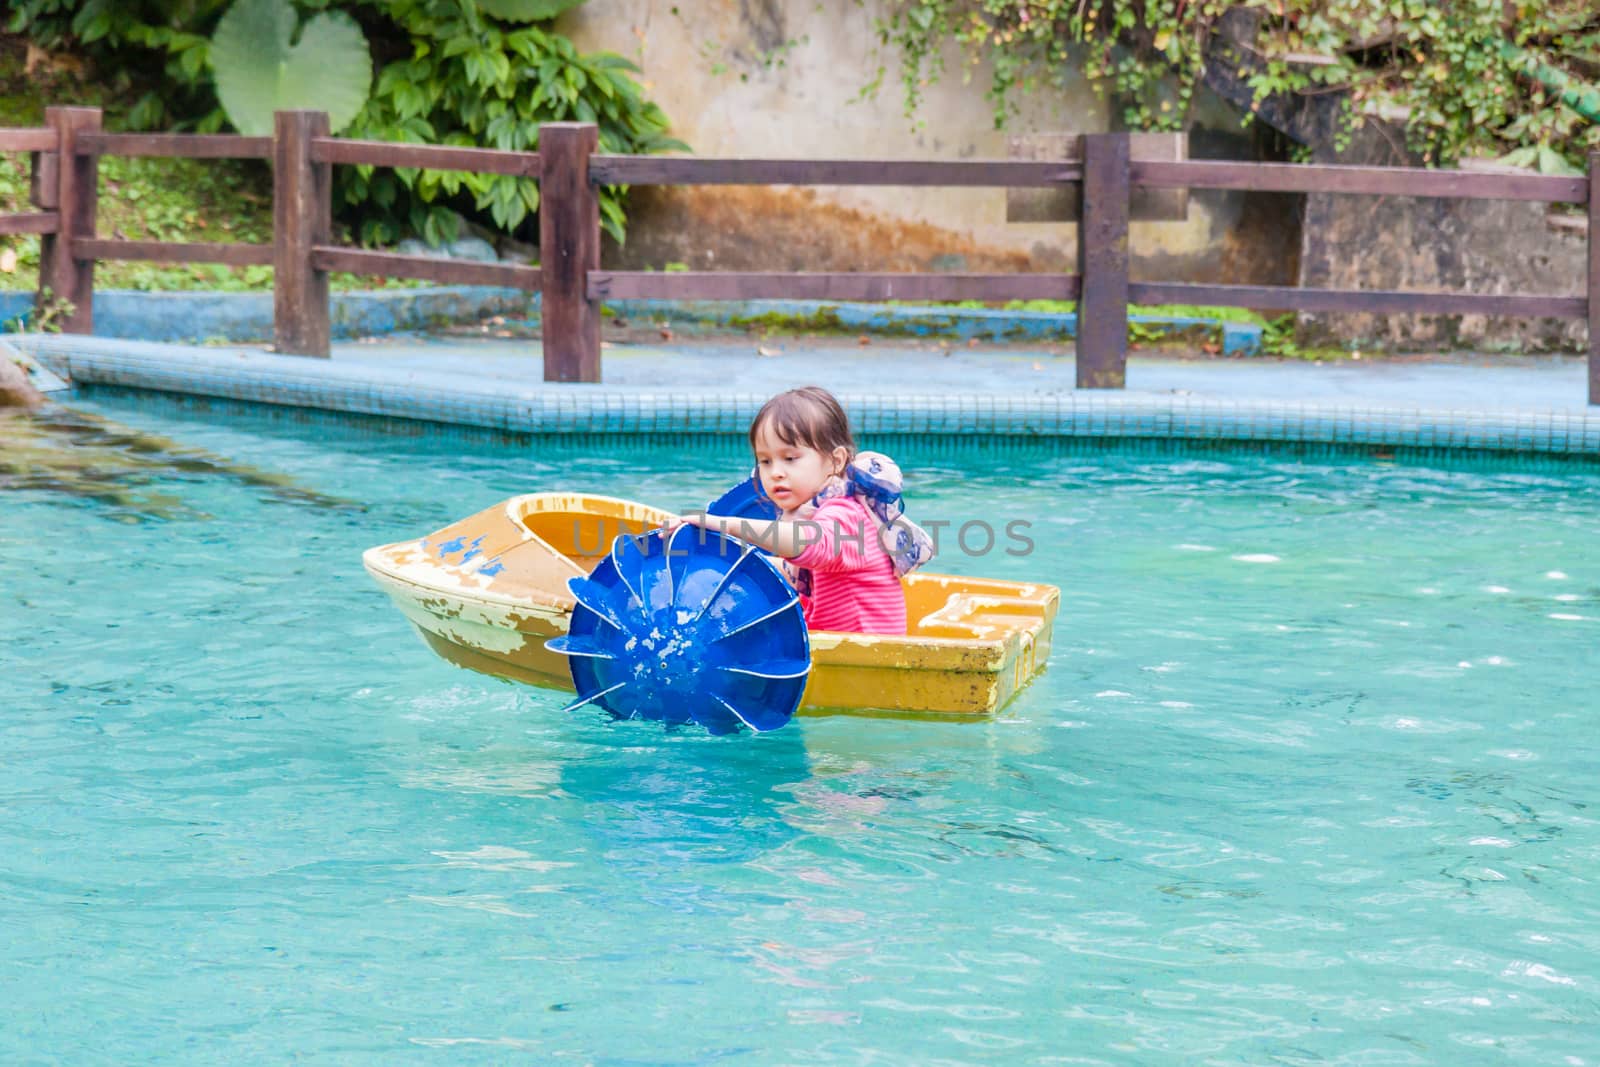 Young girl in paddle boat by imagesbykenny